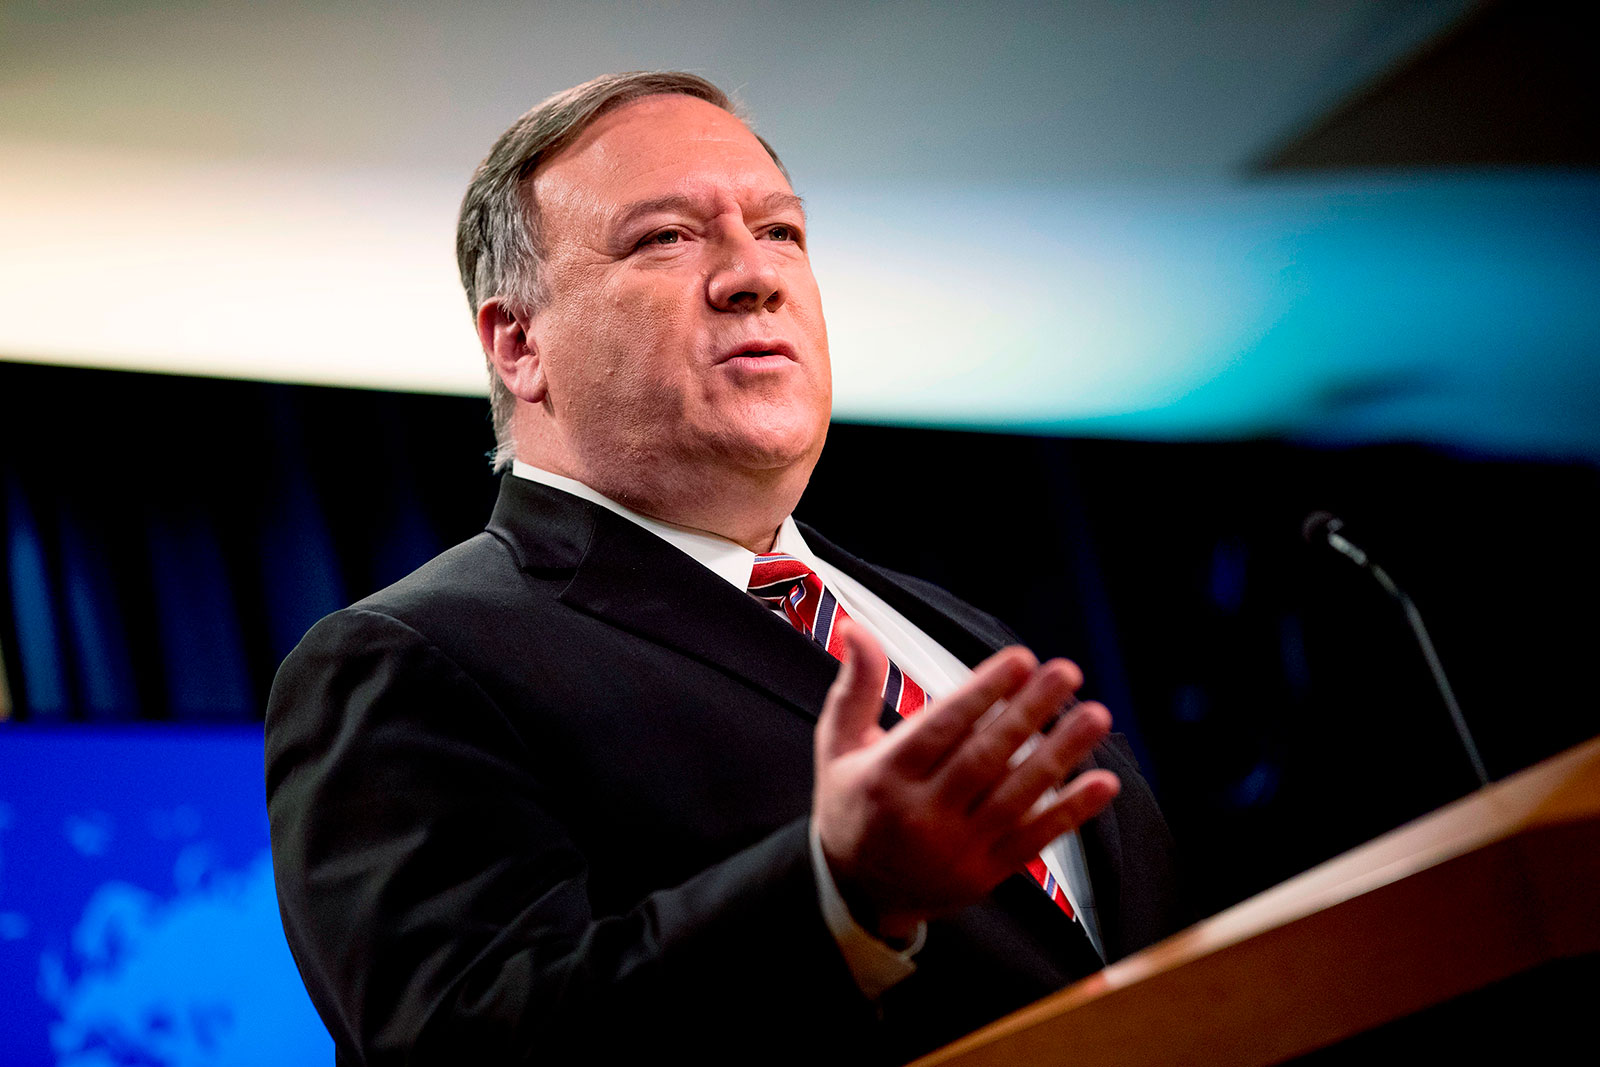 Secretary of State Mike Pompeo speaks at a news conference at the State Department on April 29.